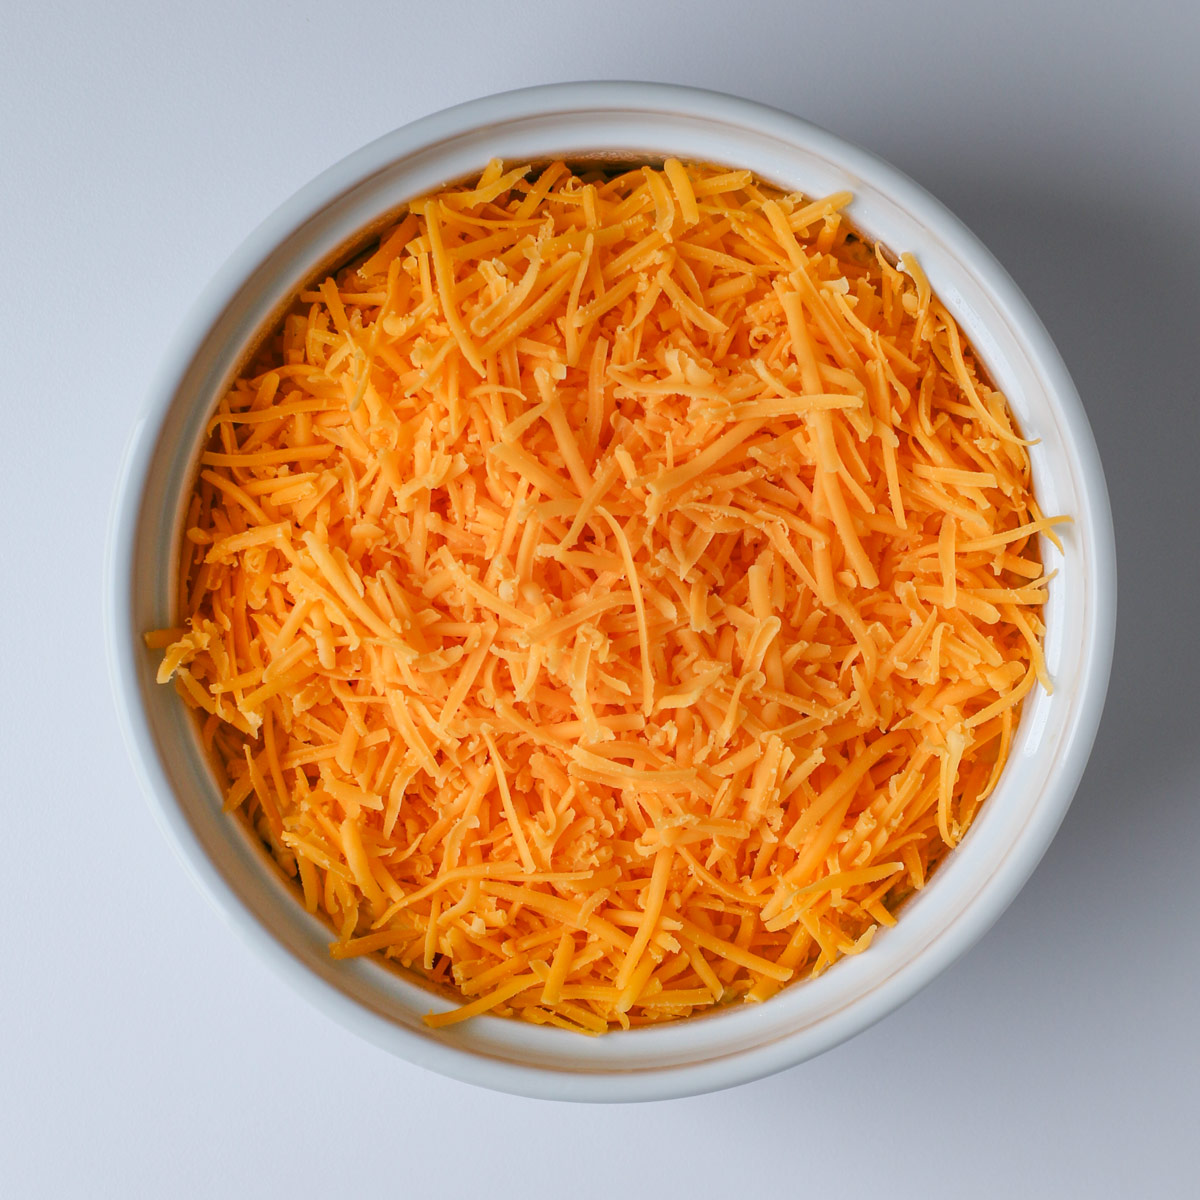 shredded cheese atop the cream cheese mixture in the white baking dish.